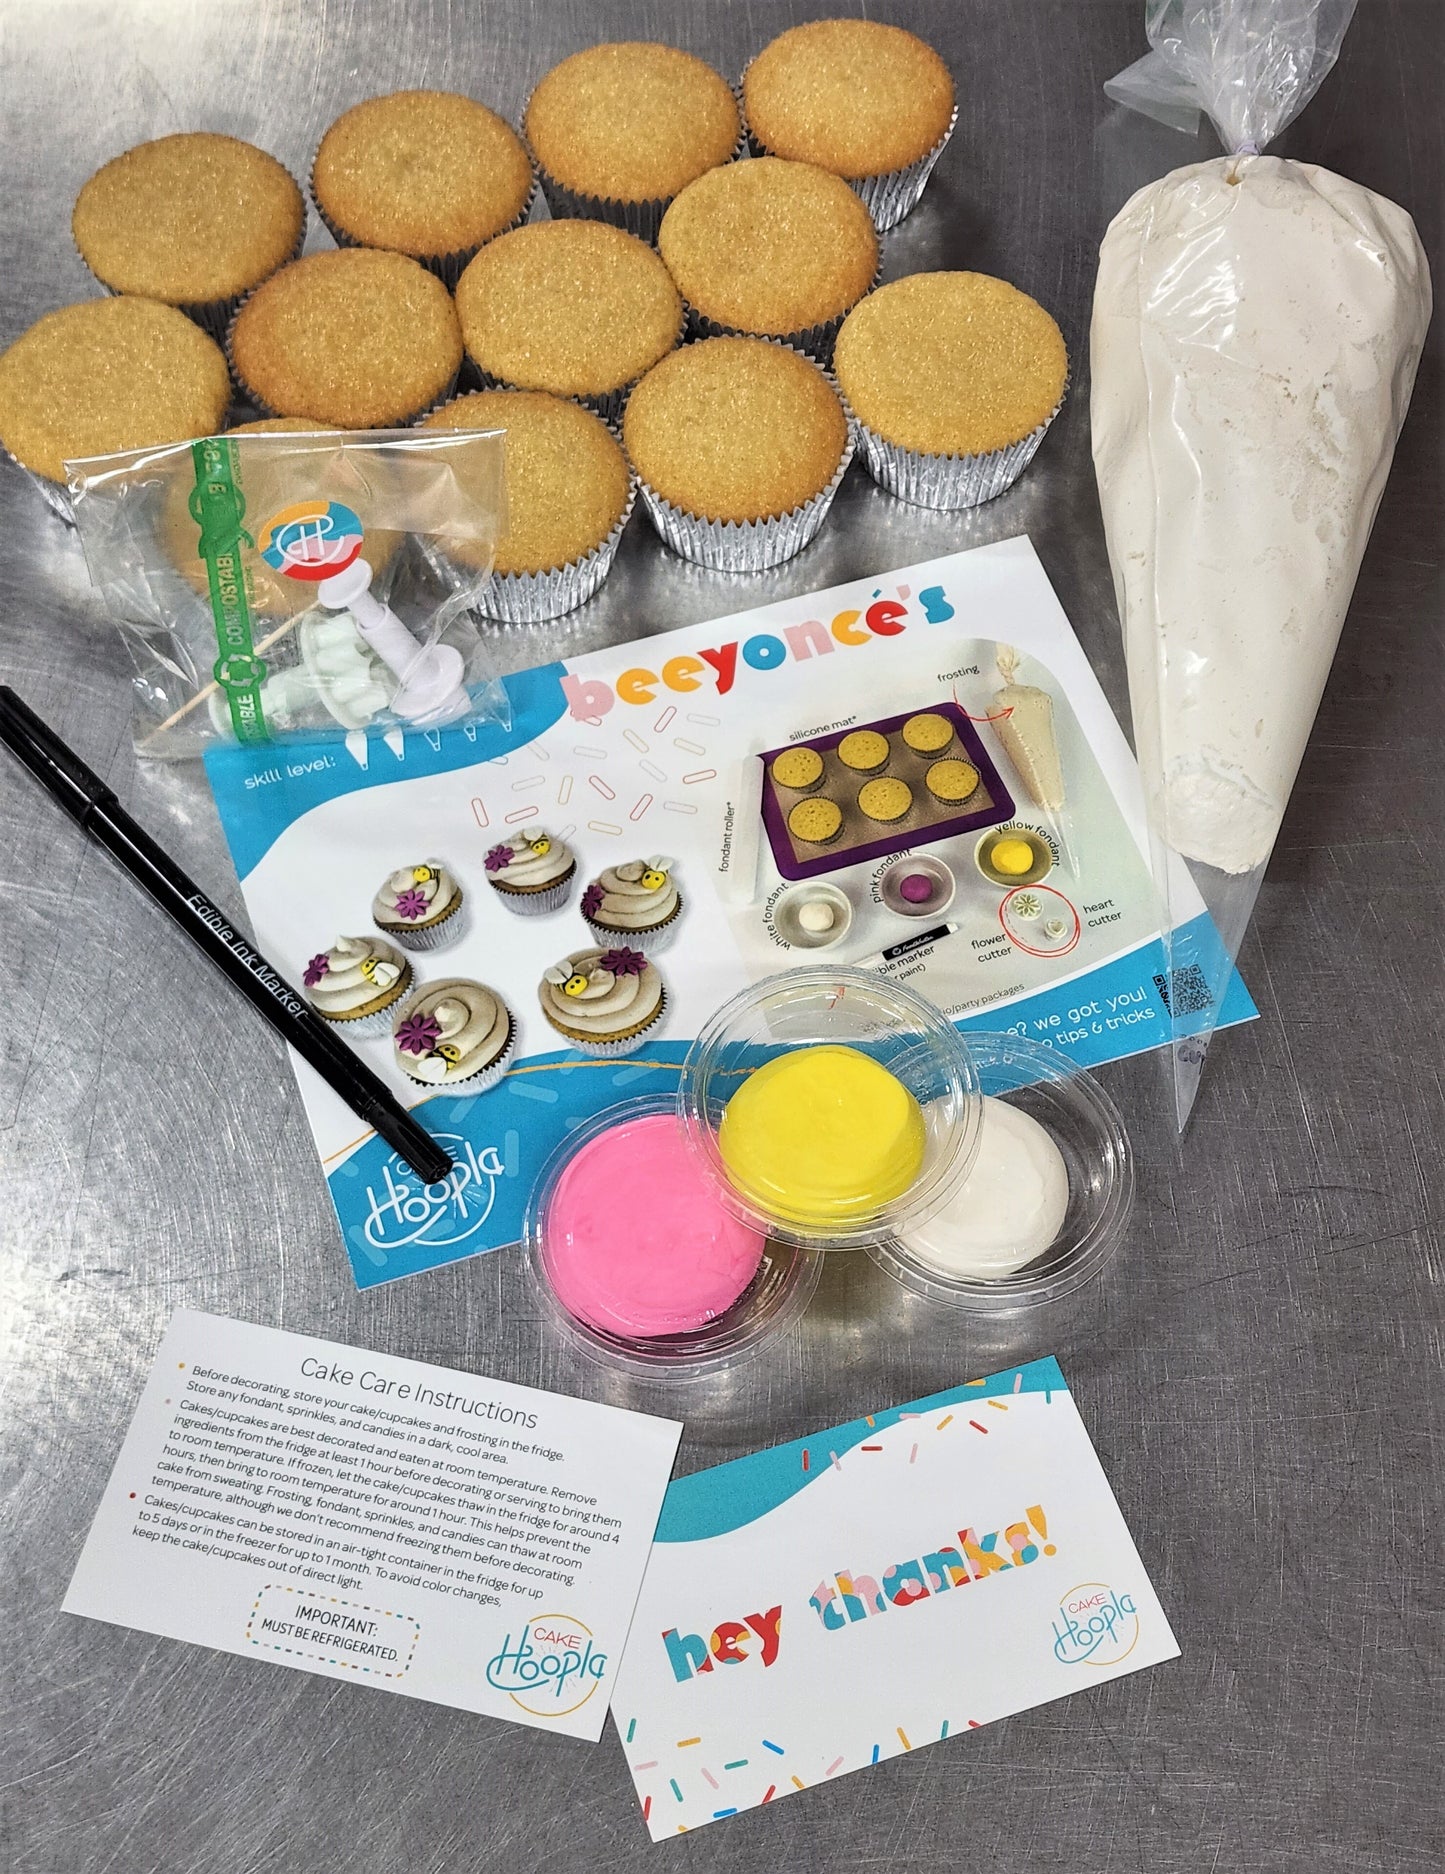 The ingredients and materials in a DIY Beeyonce's cupcake kit. 12 cupcakes, a large piping bag of white frosting, an edible black marker, pink, yellow, and white fondant, two fondant cutters in a compostable cellophane bag, a colorful instruction card with pictures, a cake care instruction card, and a thank you card.